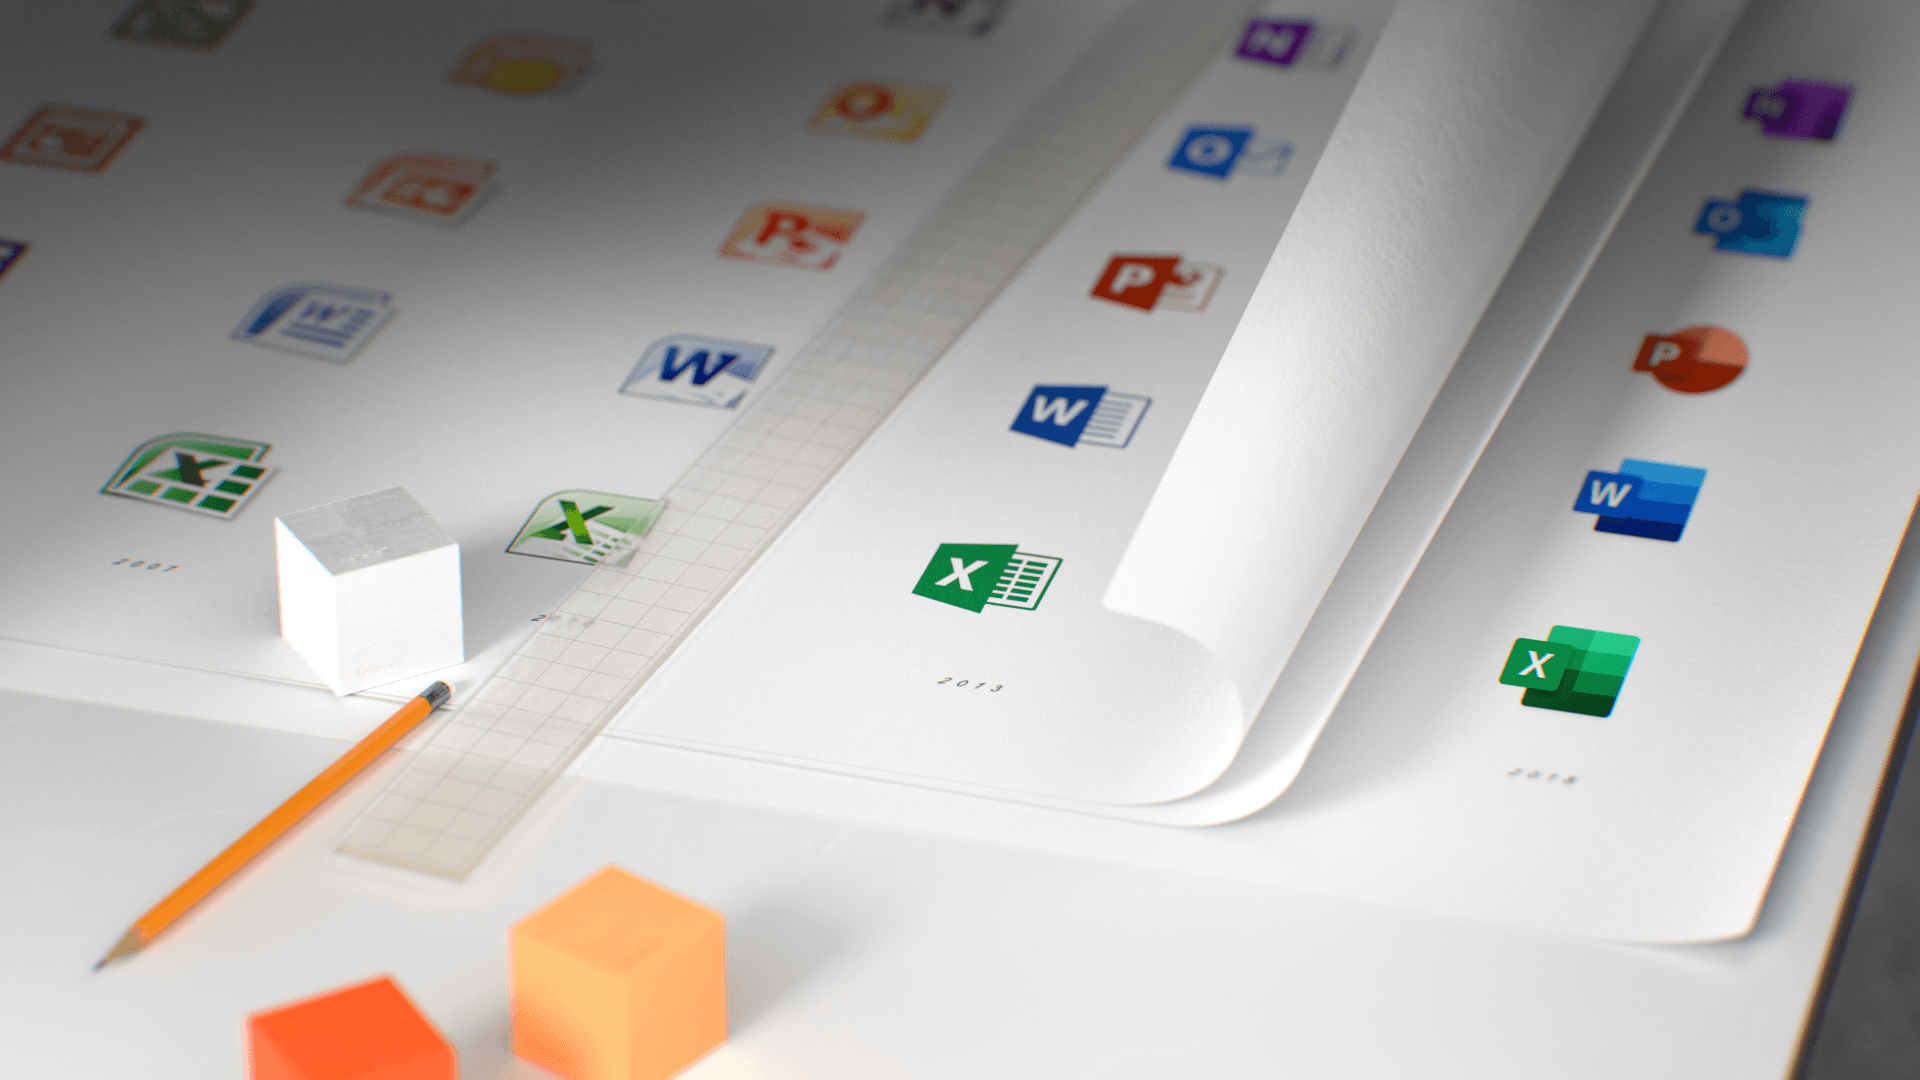 New Office Logo - Microsoft's new Office icons are part of a bigger design overhaul ...